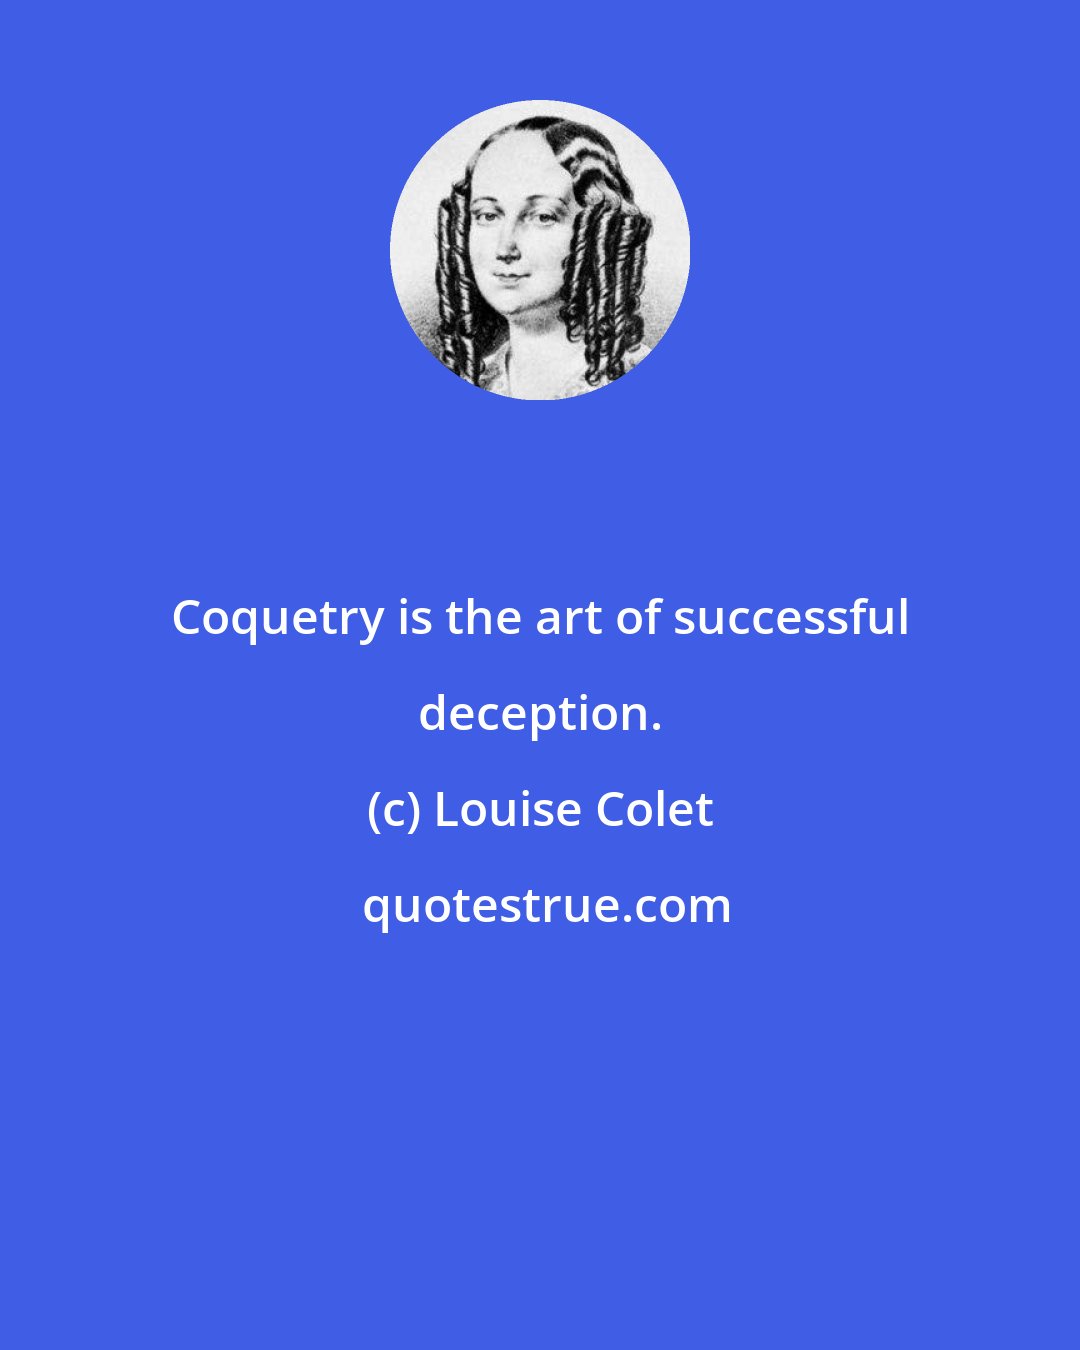 Louise Colet: Coquetry is the art of successful deception.